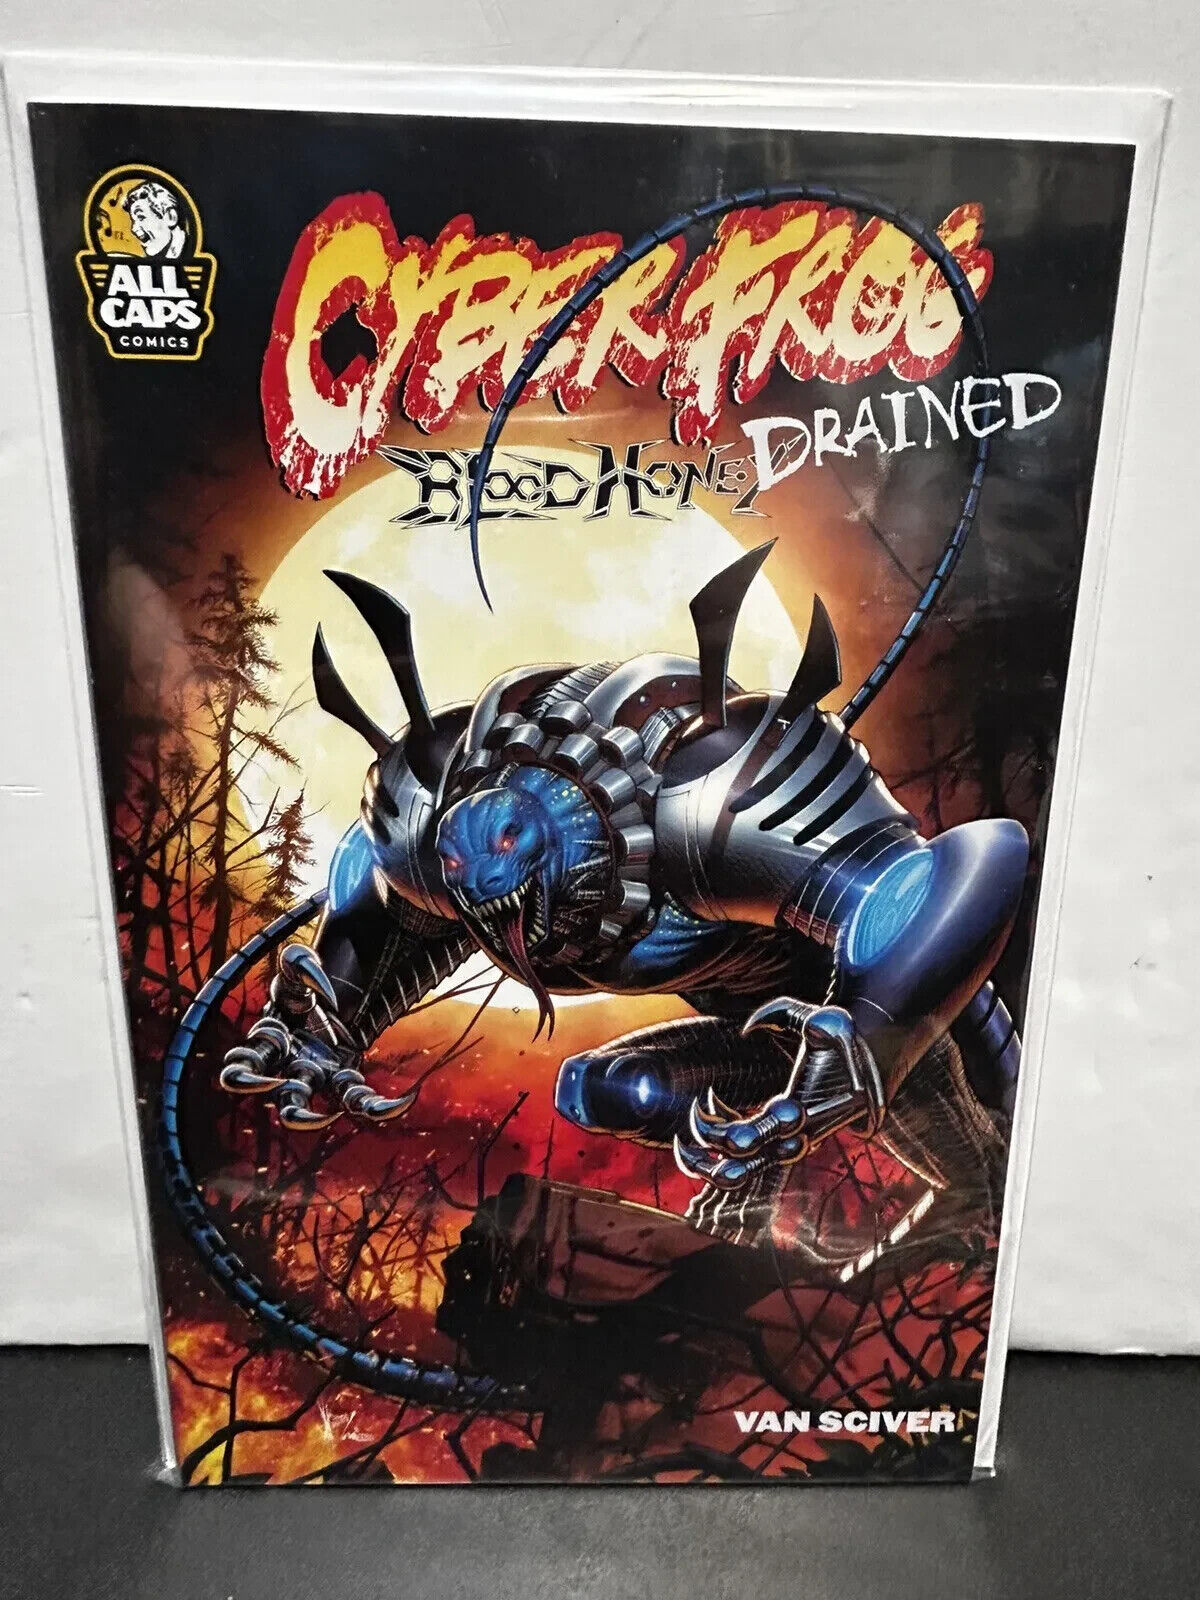 Cyberfrog: Bloodhoney Drained - SALAMANDROID EDITION Acetate KEOWN cover